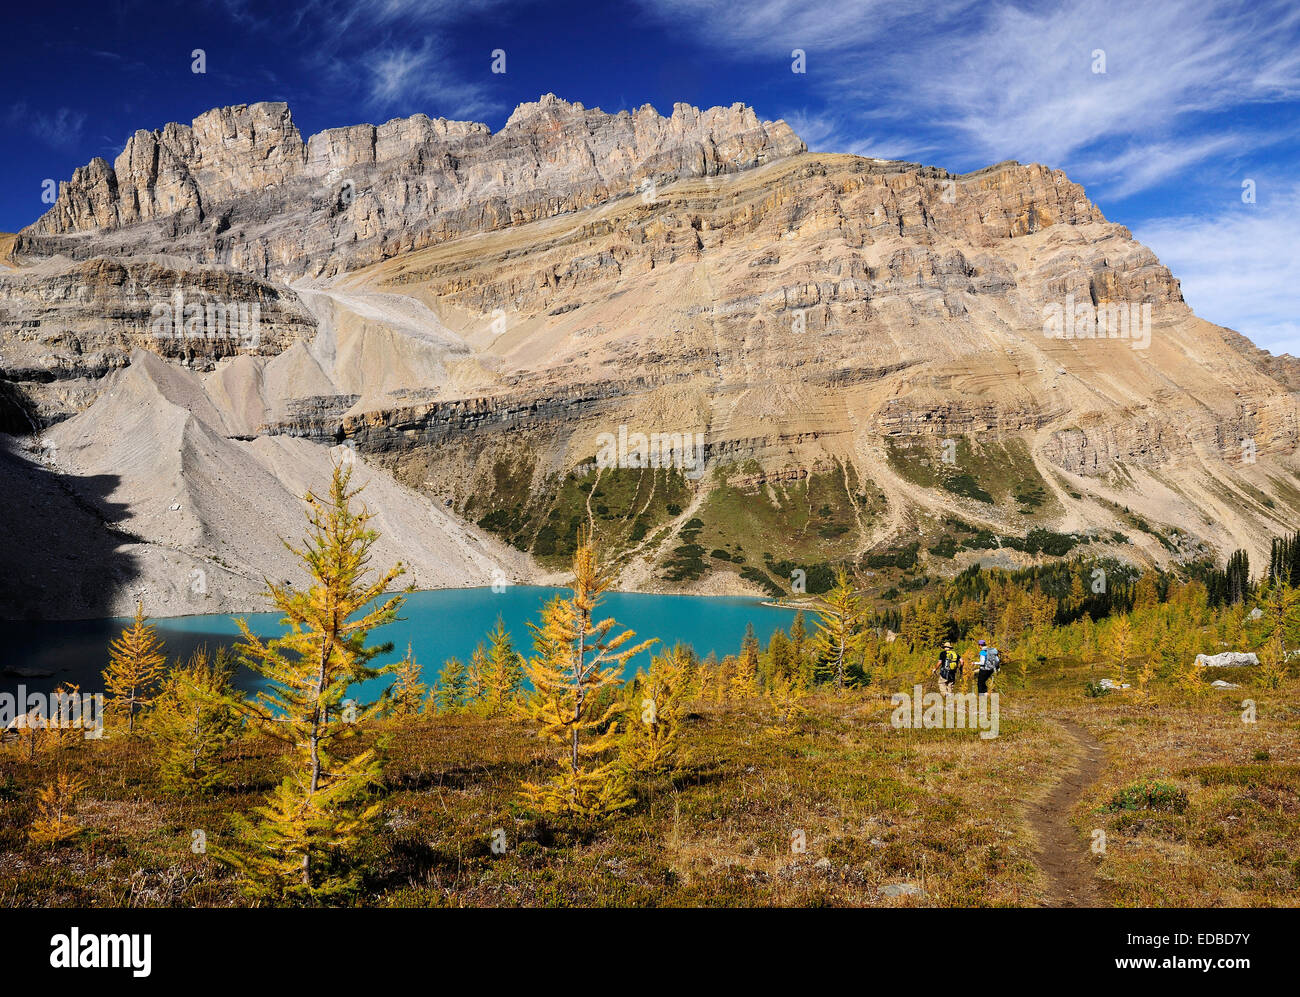 Hike from Lake Louise to Skoki Lodge in the Rocky Mountains, hikers walking across a yellow coloured larch forest at the Stock Photo